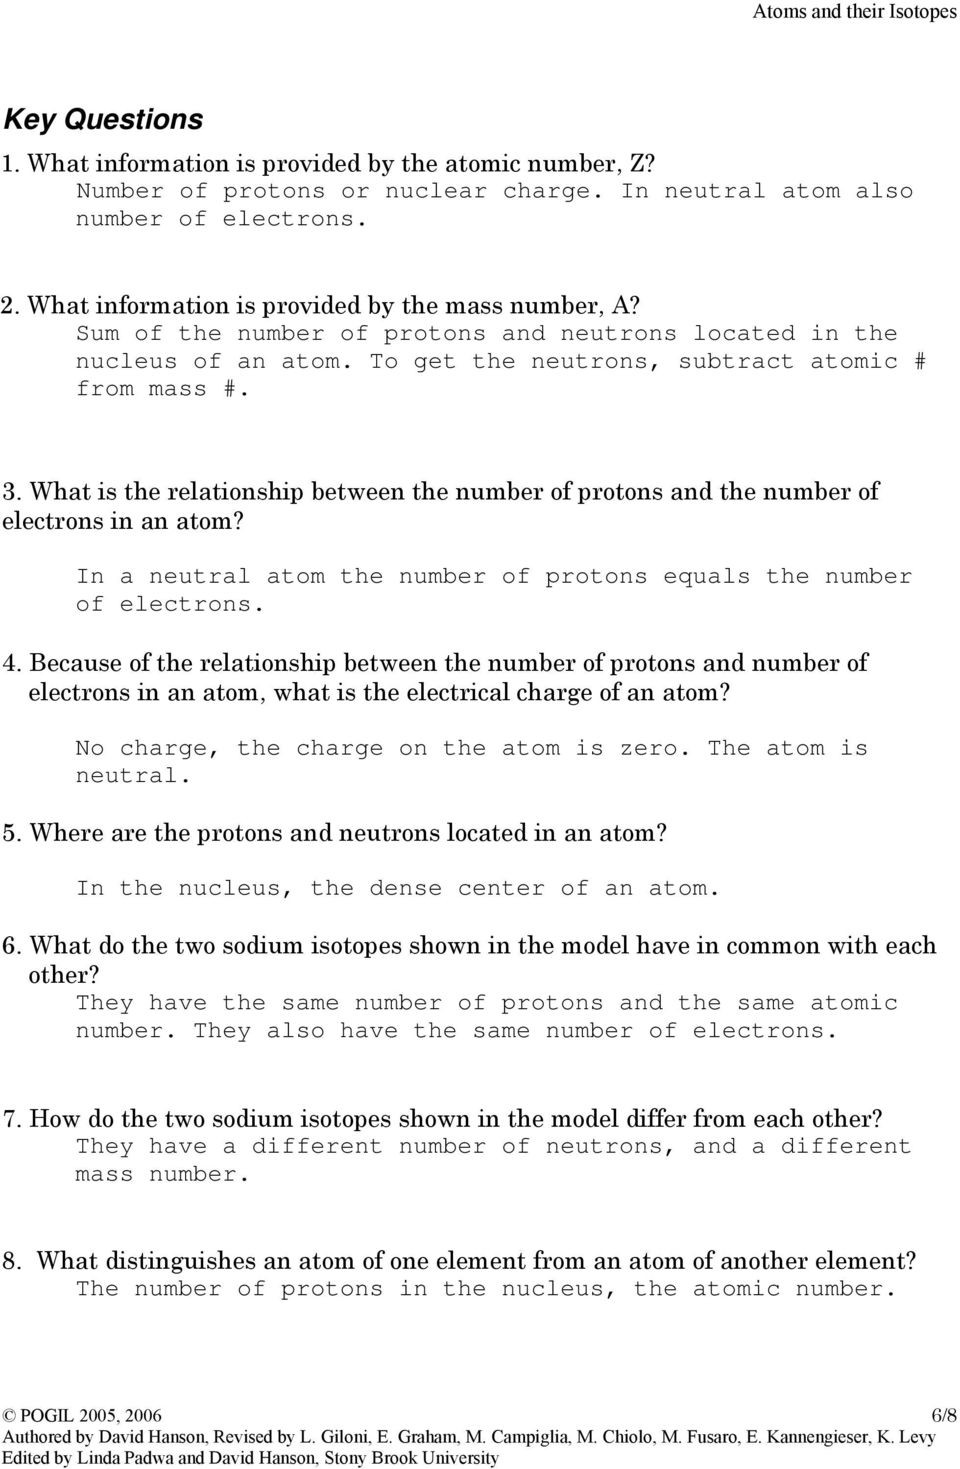 Atoms and isotopes Worksheet Answers Instructors Guide atoms and their isotopes Pdf Free Download